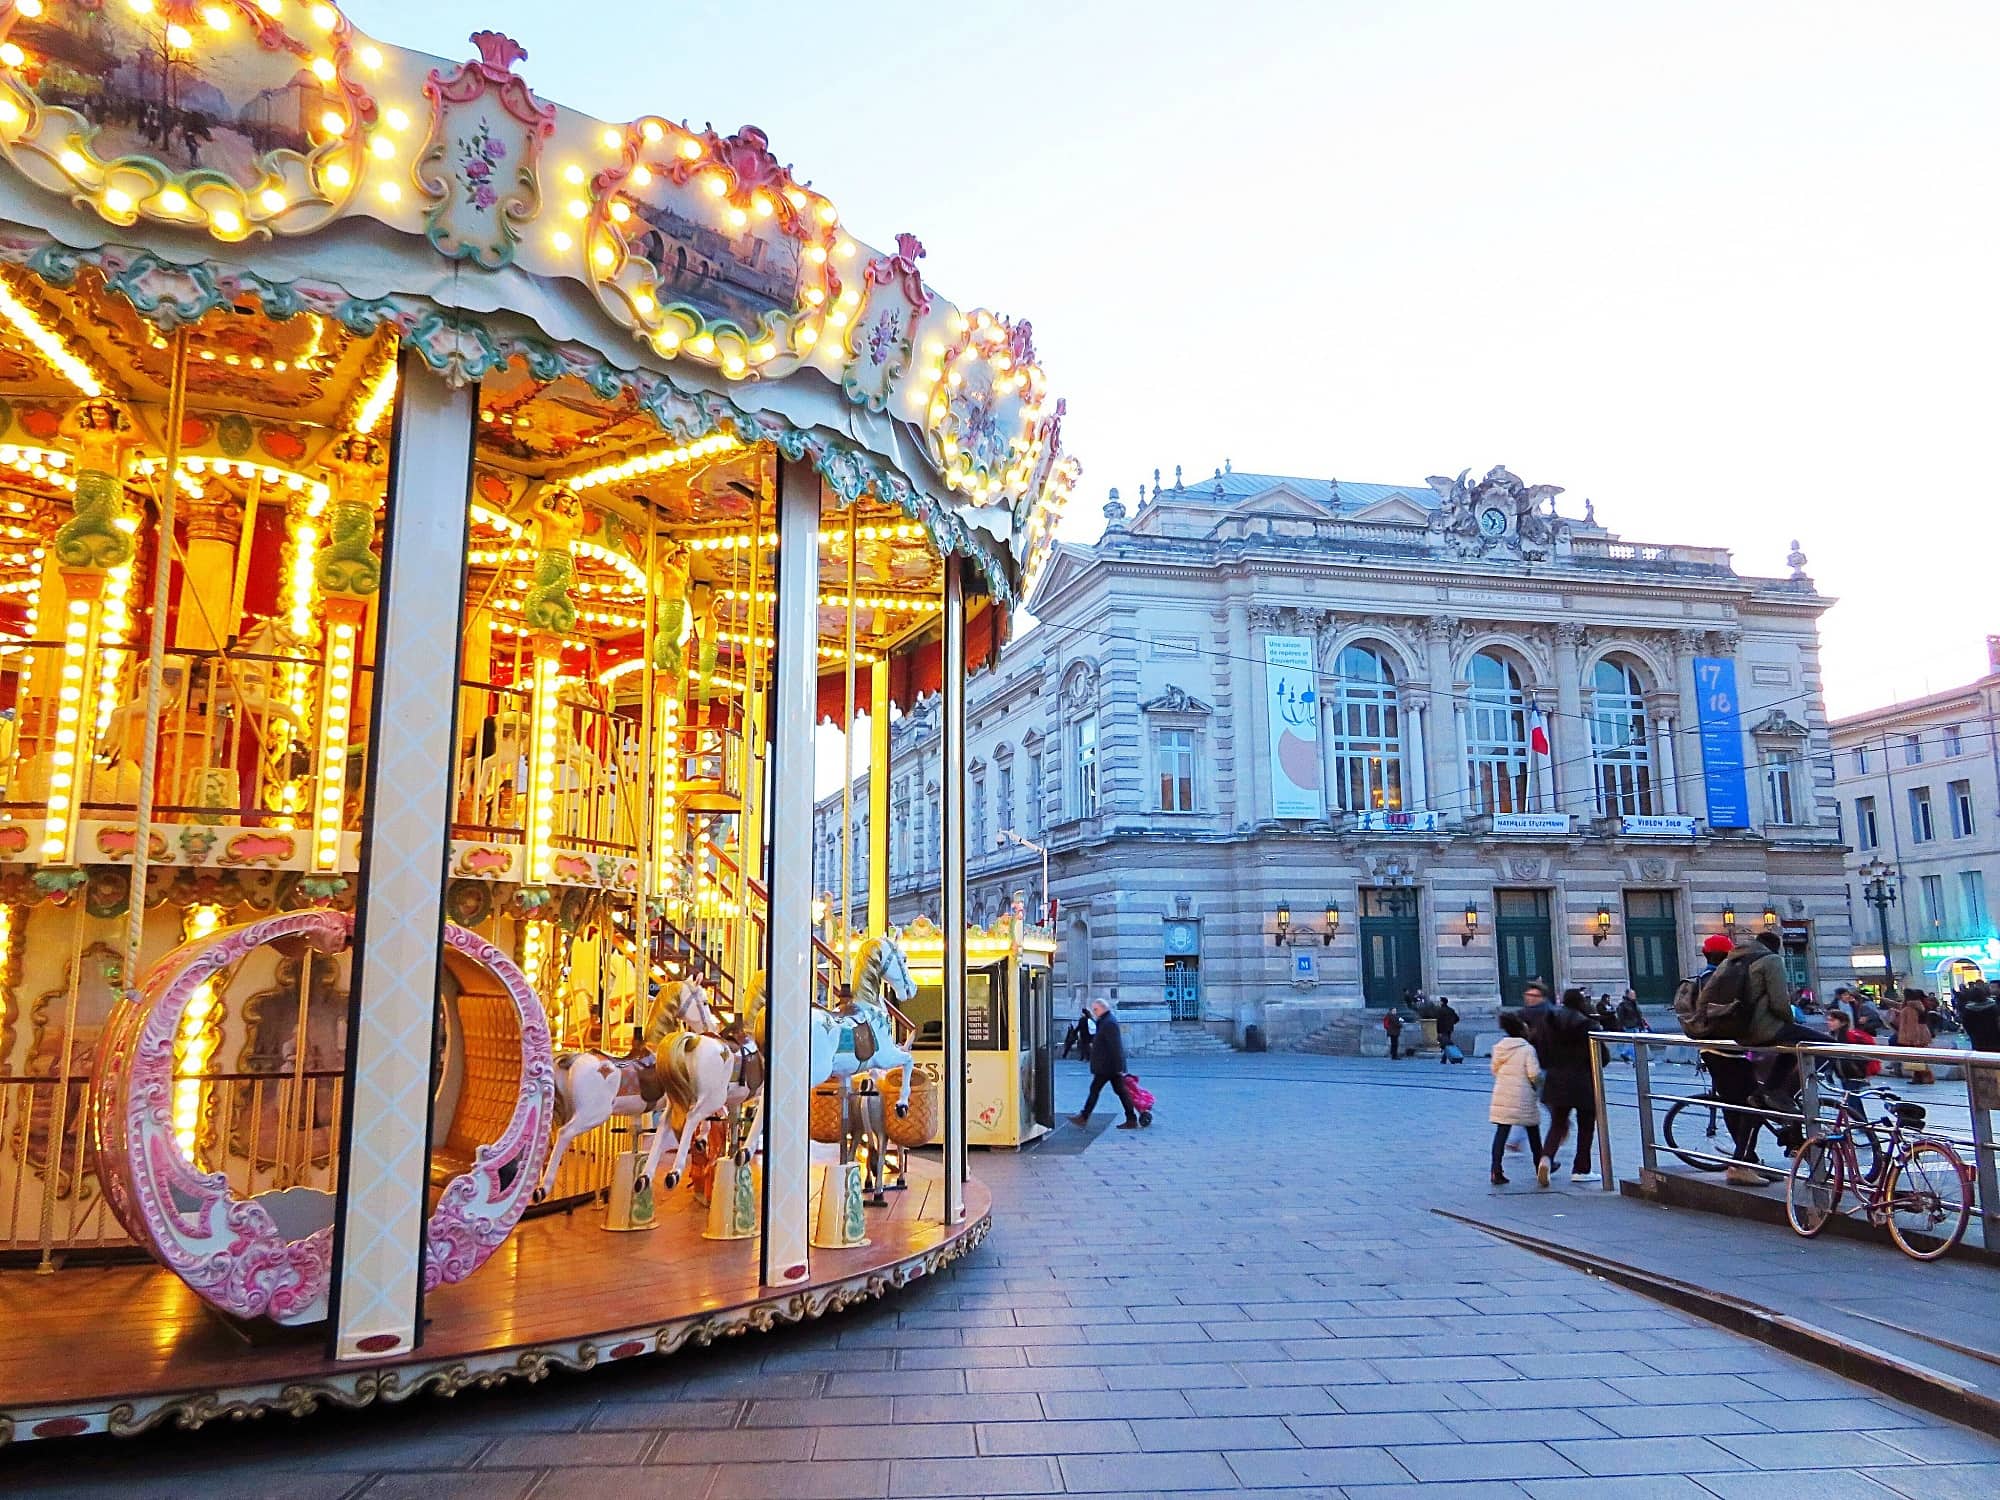 The carousel and opera house on La Place de la Comedie in Montpellier with kids